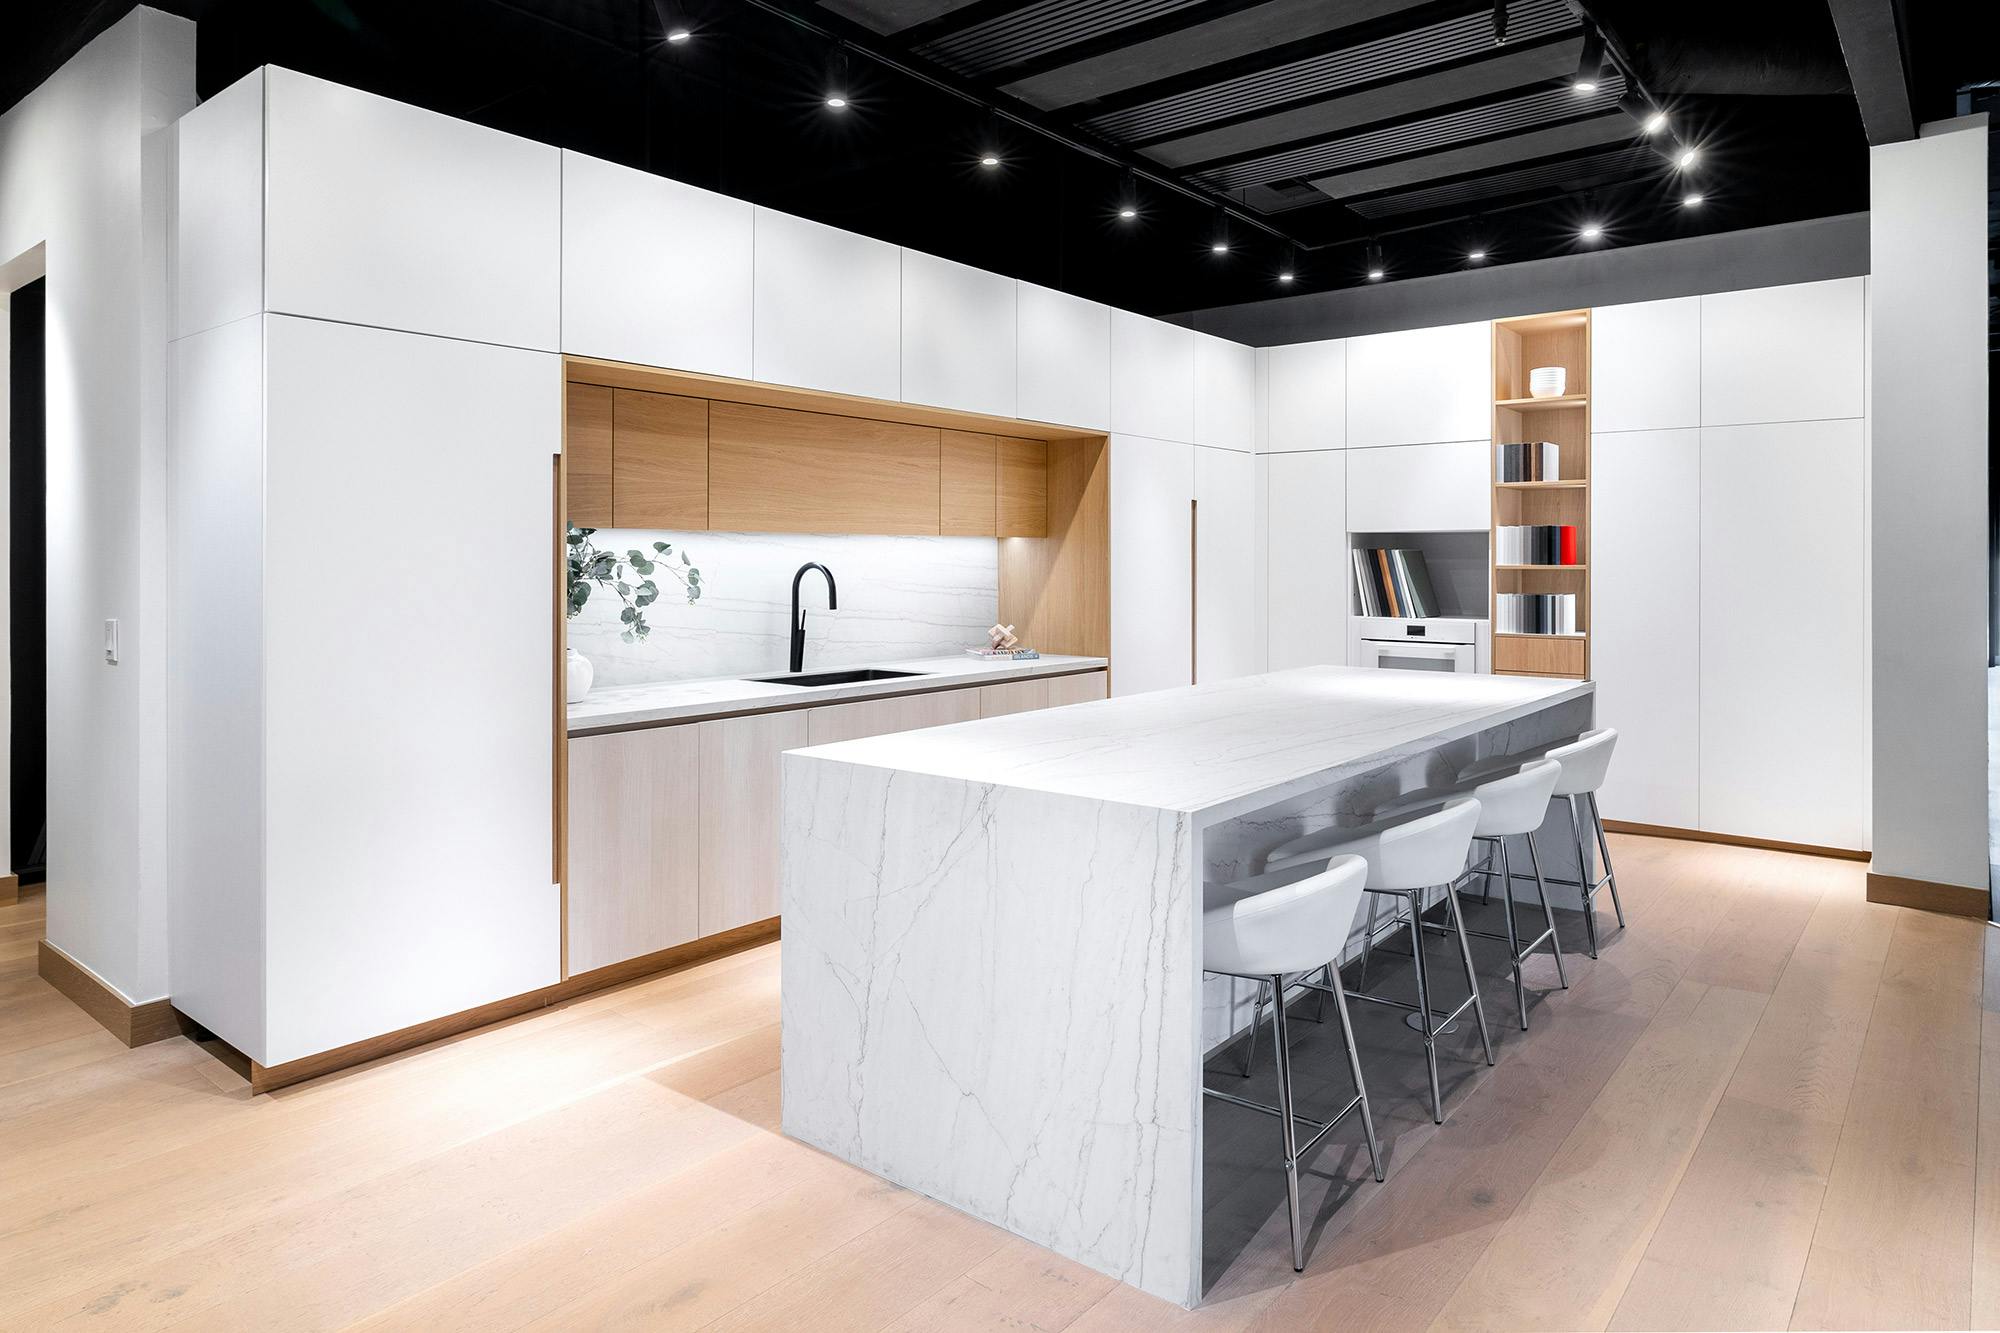 Image of RonbowshowroomSF brightroomSFMarcellPuzsar 3.jpg?auto=format%2Ccompress&ixlib=php 3.3 in Cadenza Showroom, up to eight Dekton finishes to simulate the warmth of a home - Cosentino